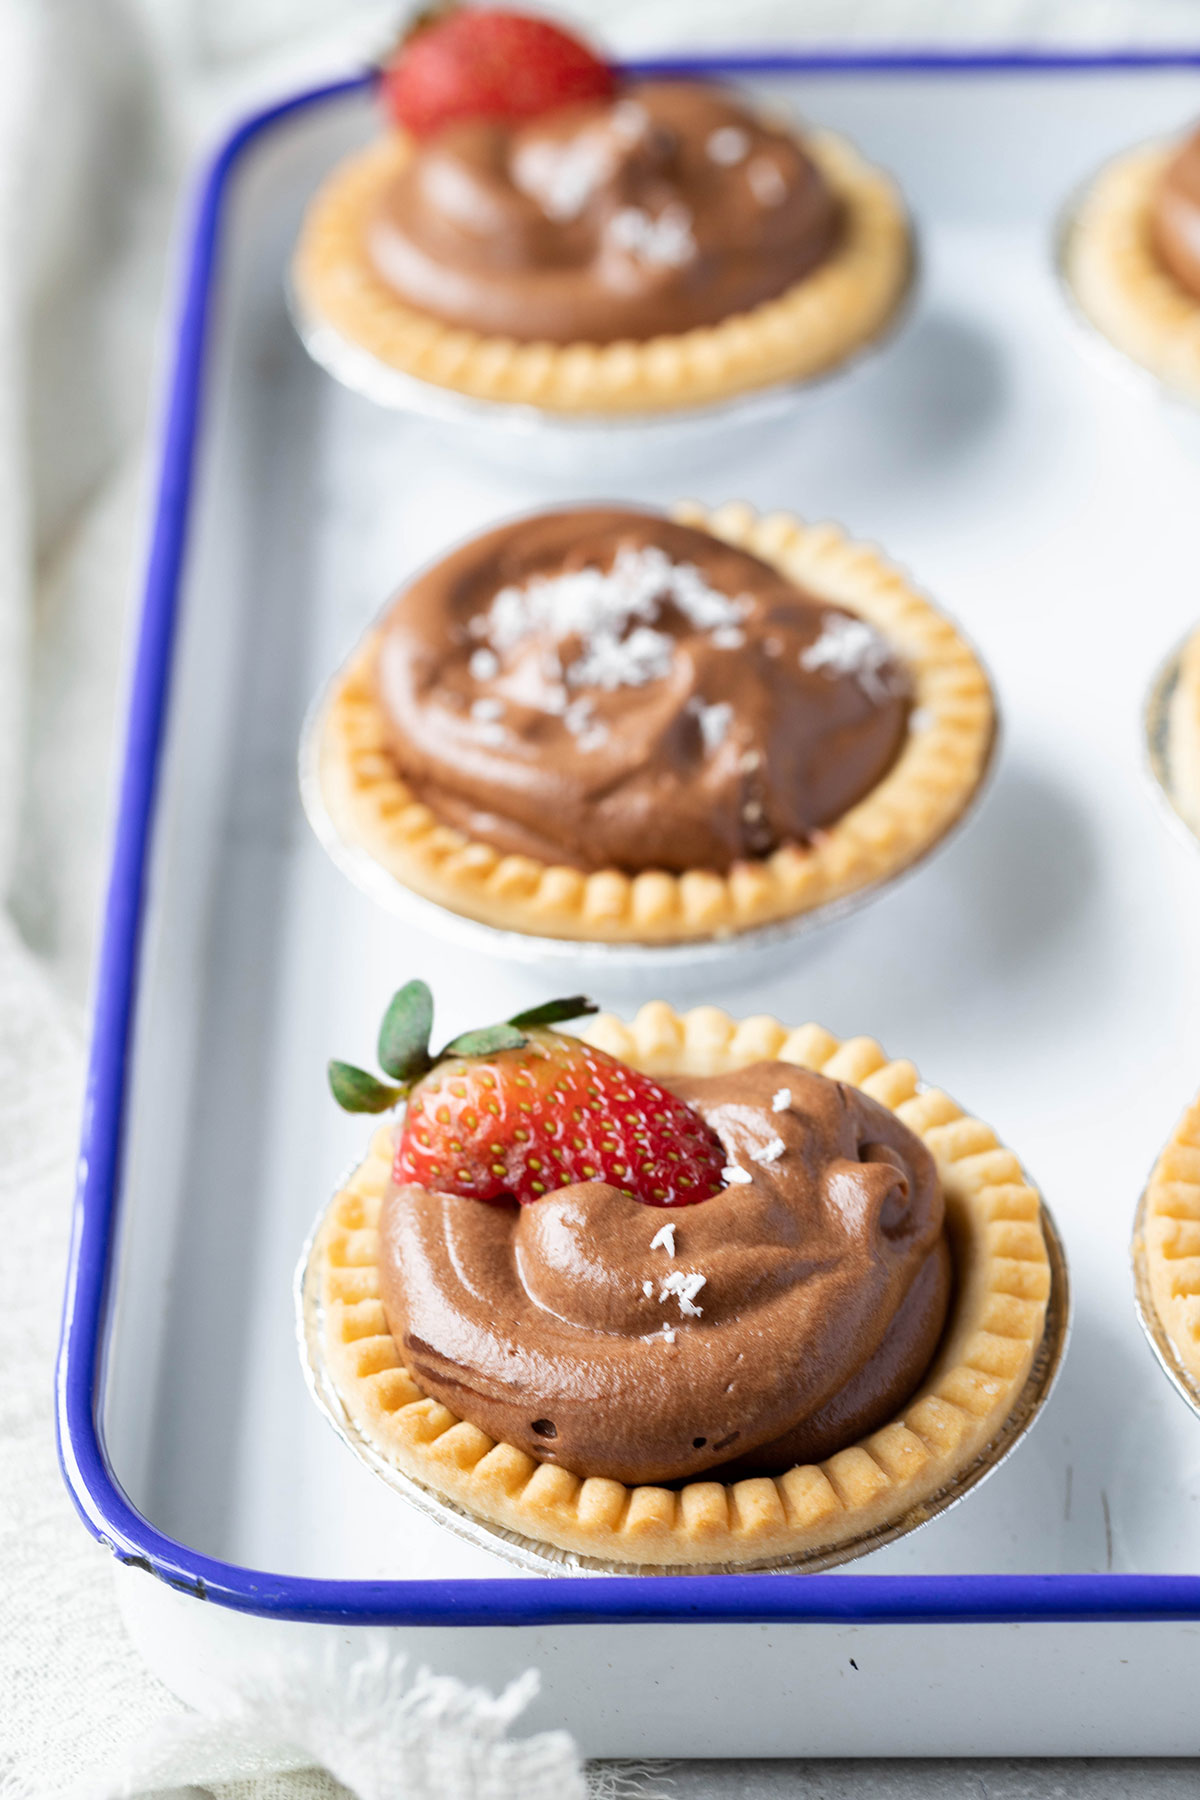 Chocolate Tartlets with Chocolate Mousse